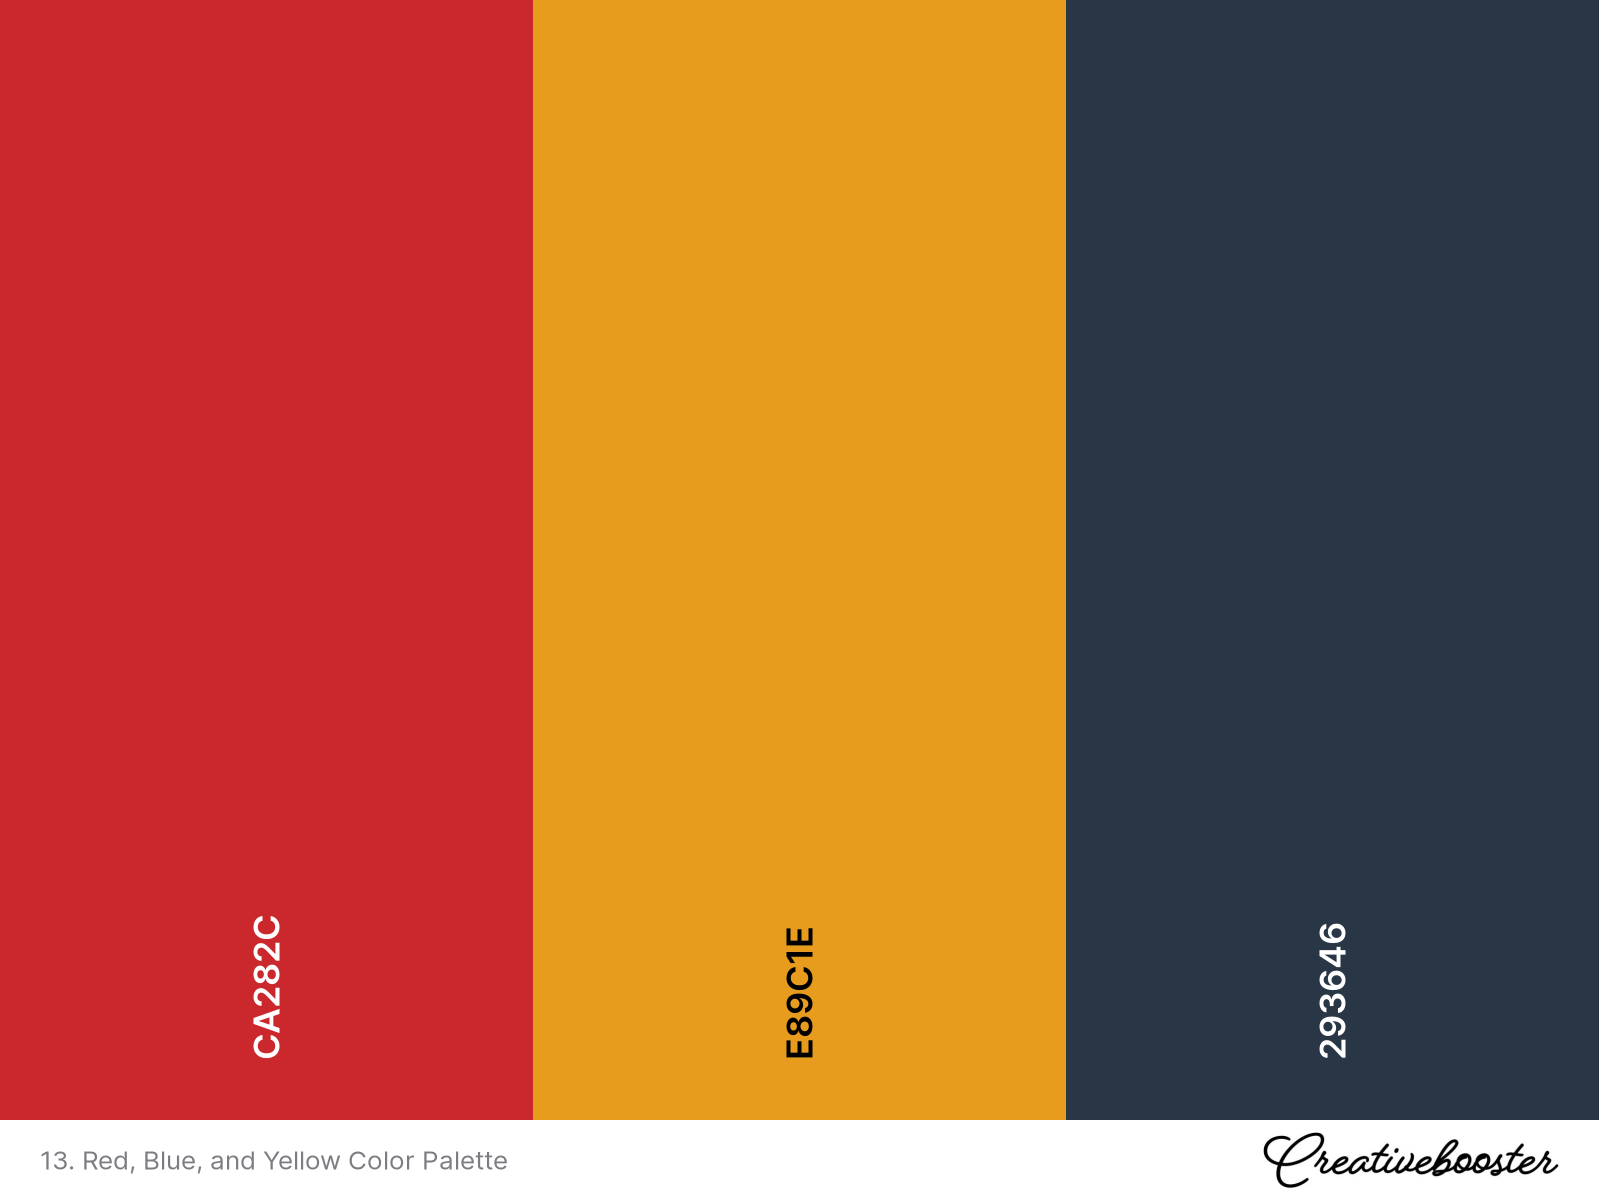 13. Red, Blue, and Yellow Color Palette